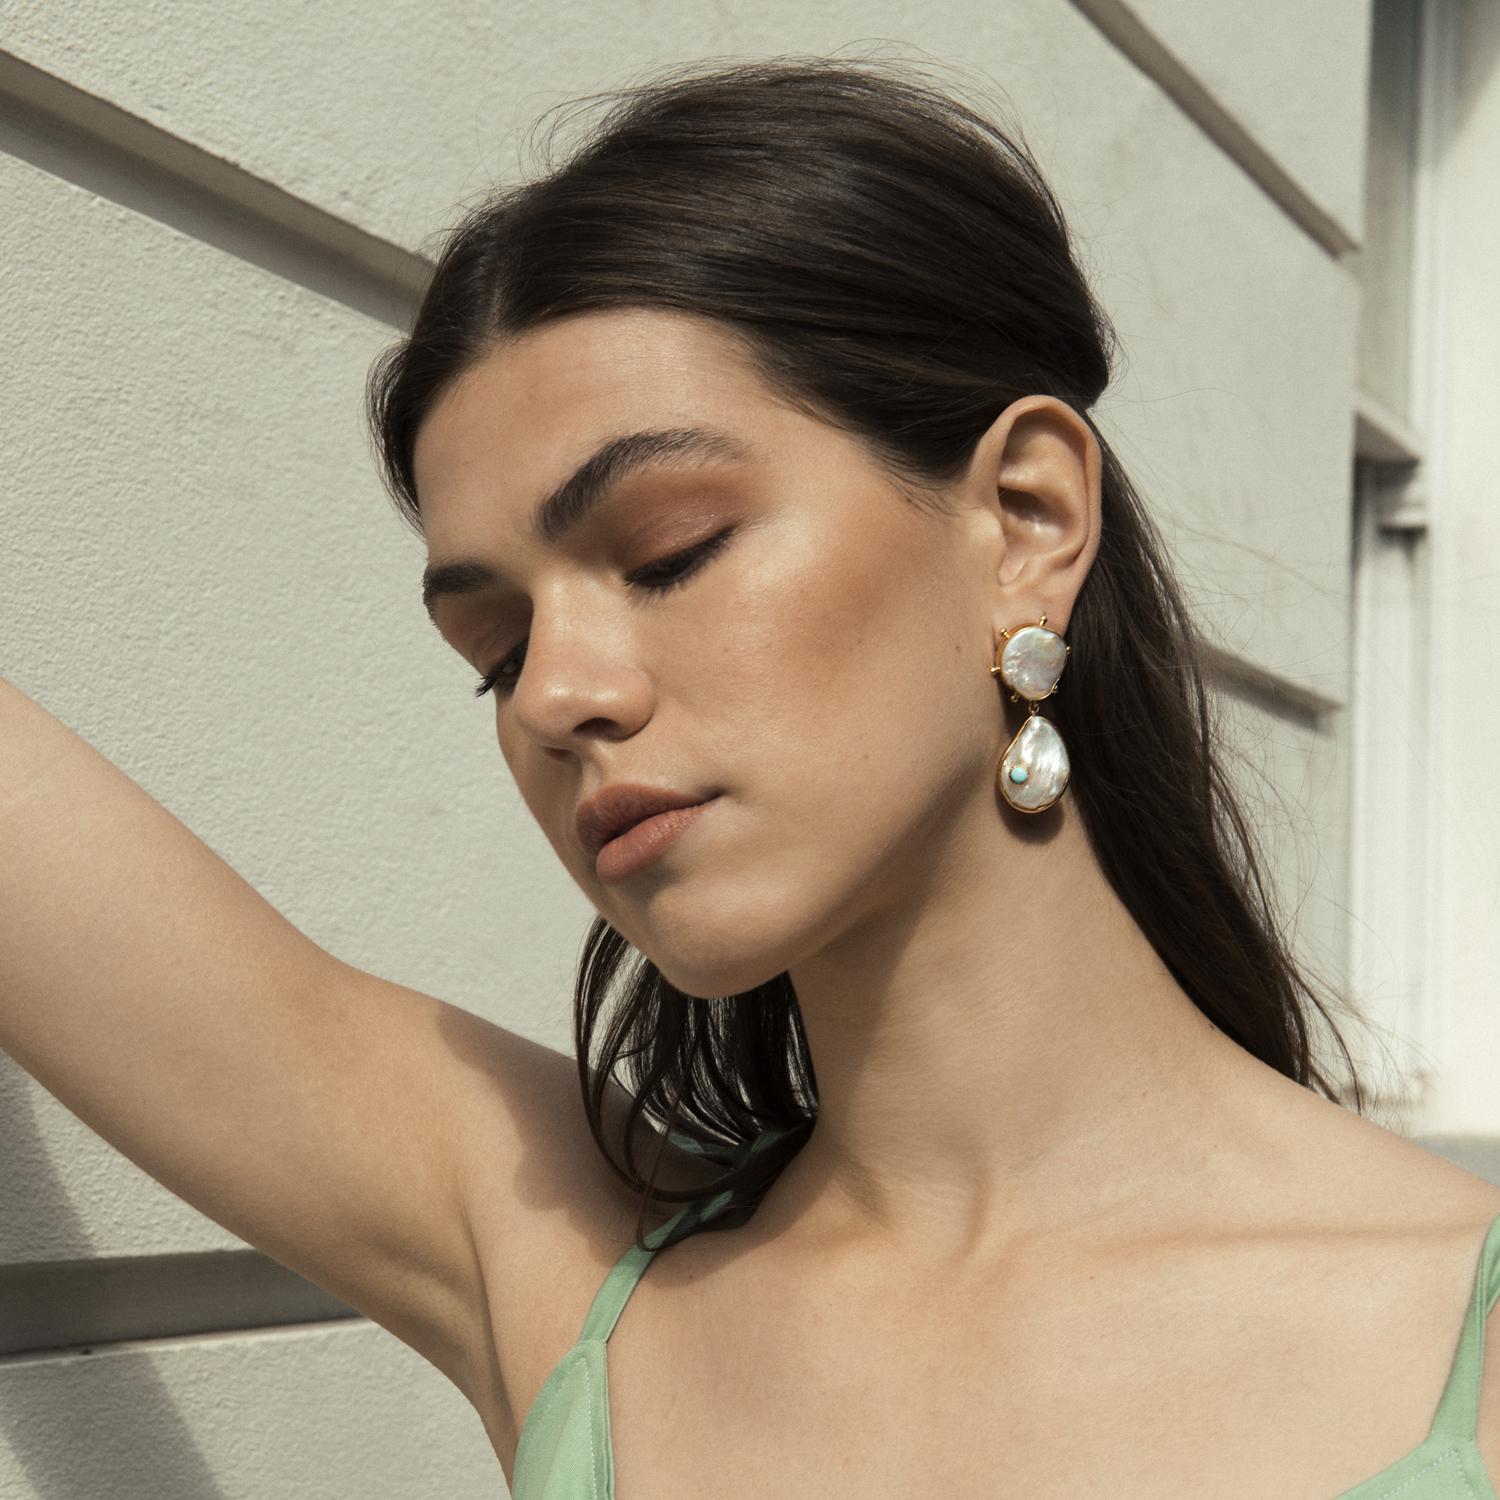 A celebration of beauty in its natural forms, the Rebel Rebel earrings by Vintouch are handmade from 18-karat gold-plated silver and each strung with glossy keshi and baroque pearls featuring studded settings inspired by the glam-rock style and two